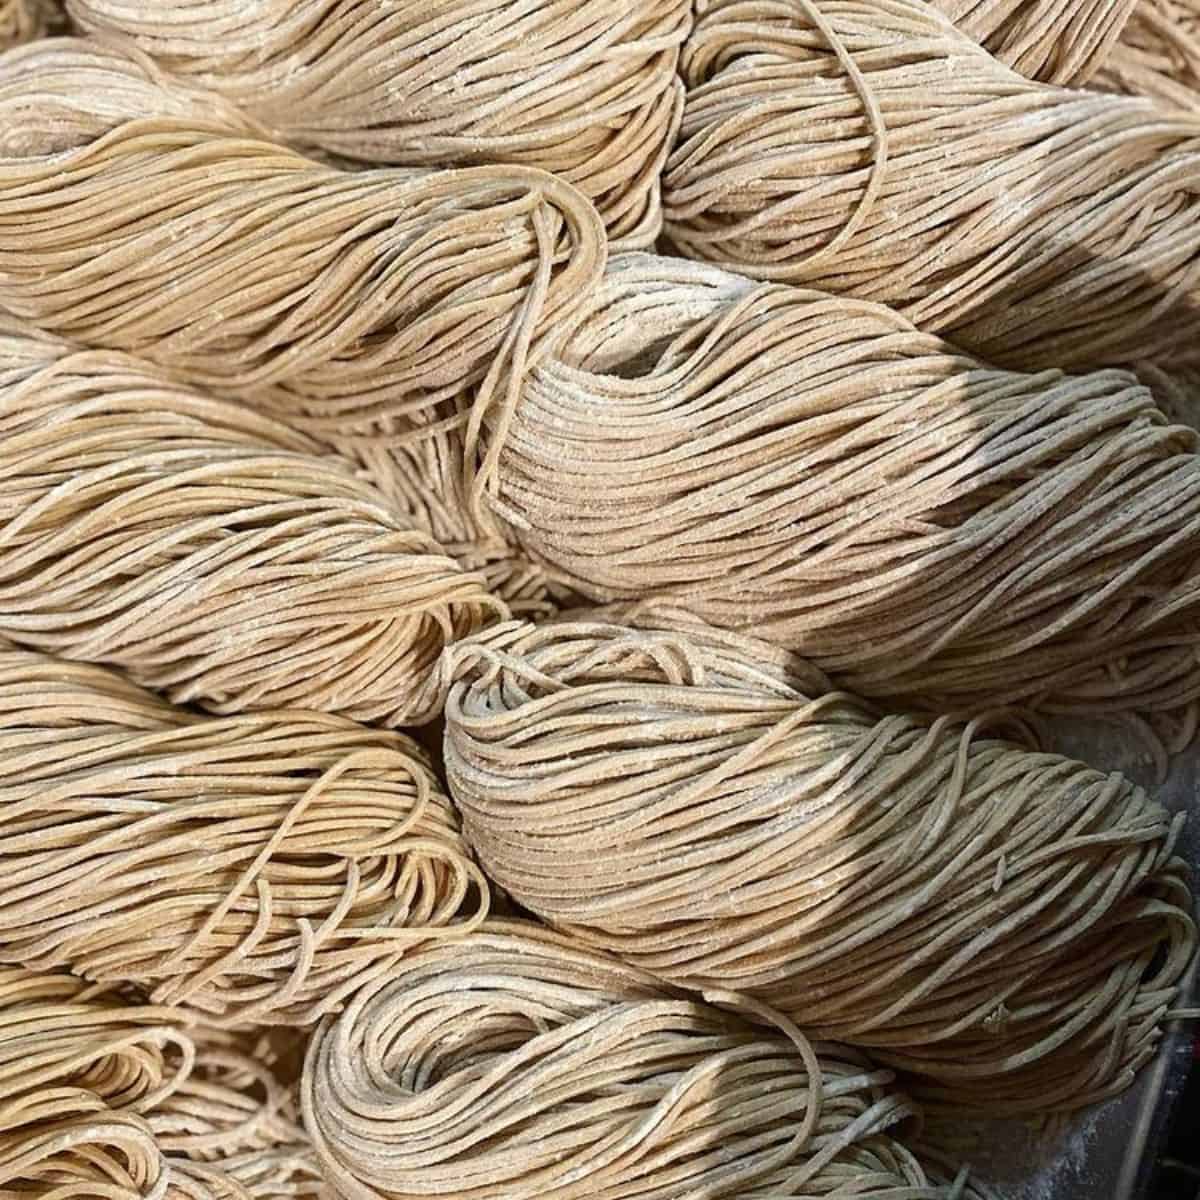 Uncooked chinese noodles